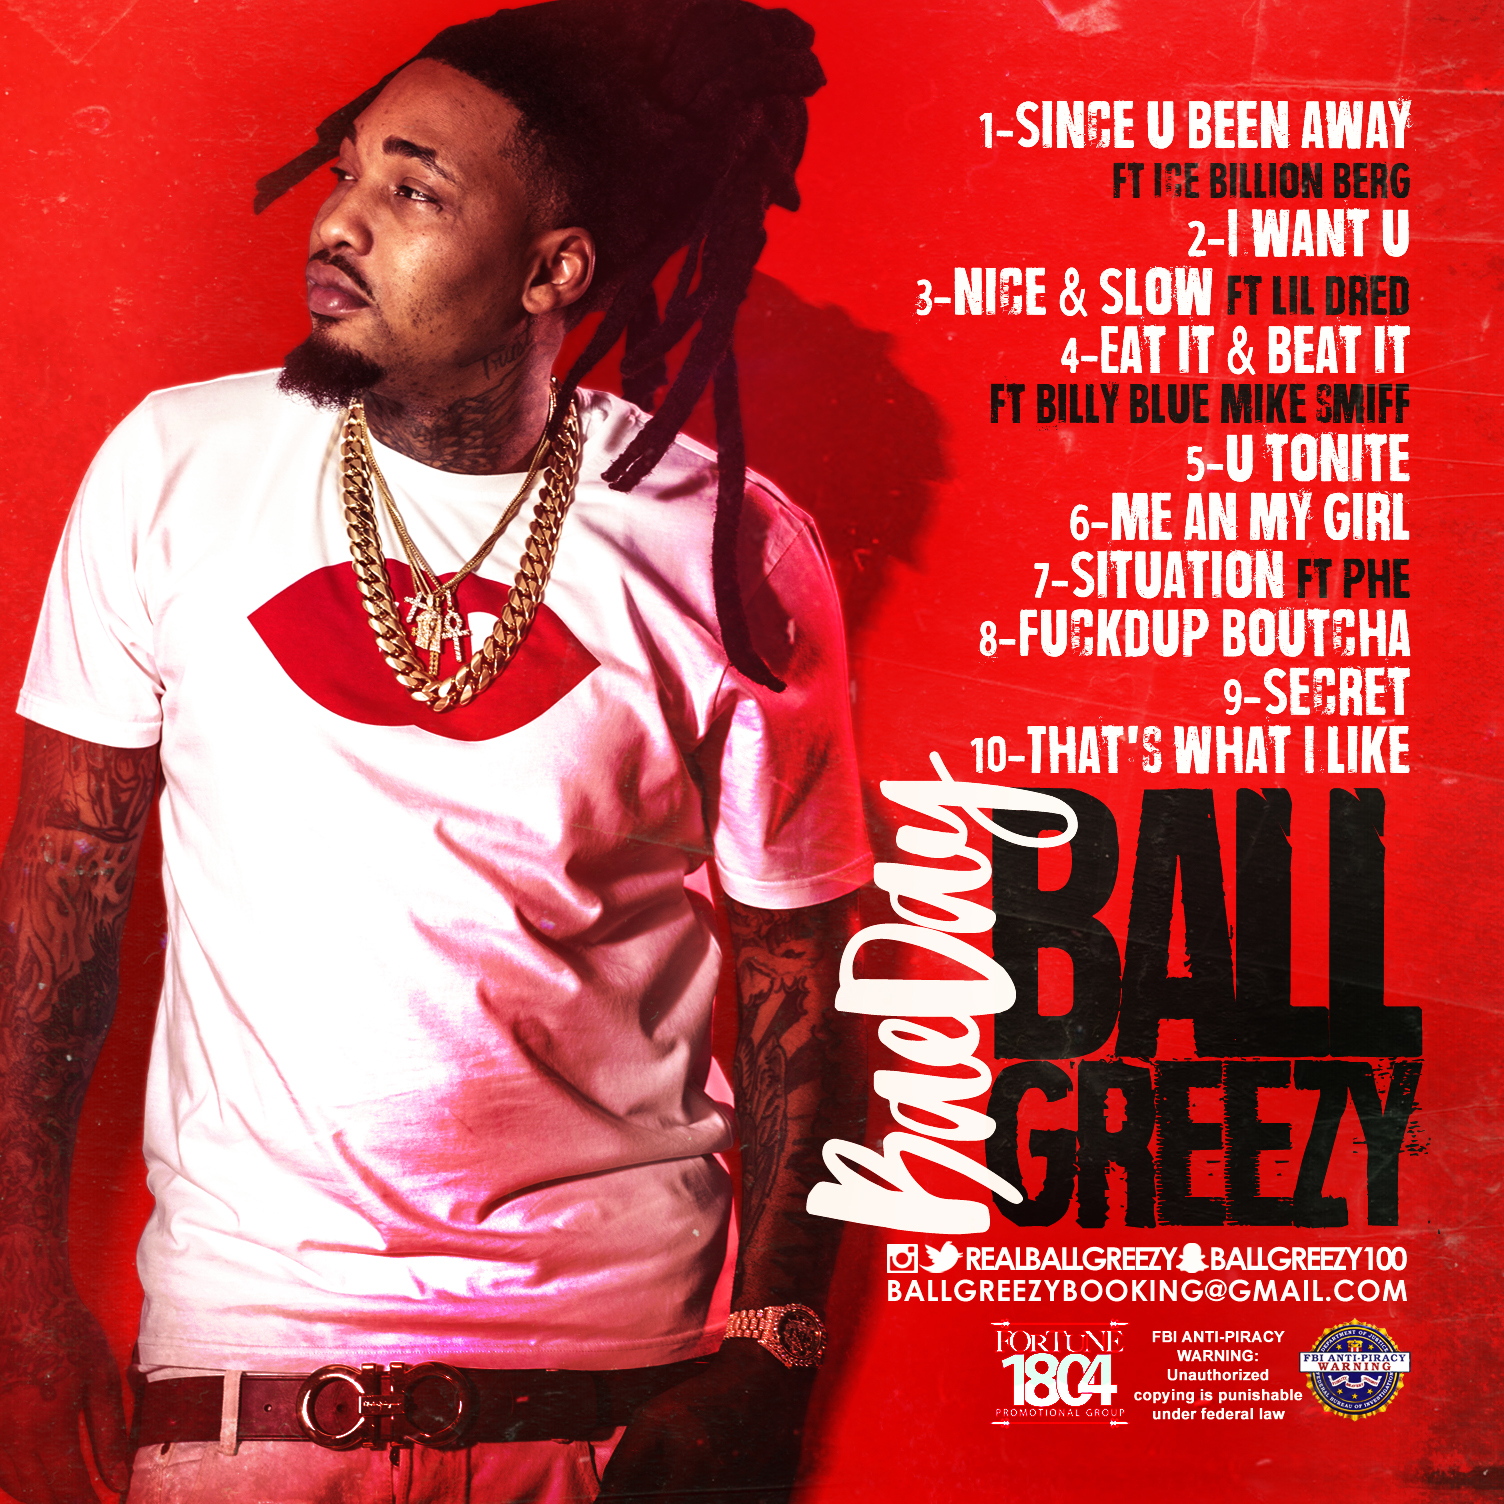 Ball greezy bae day album download